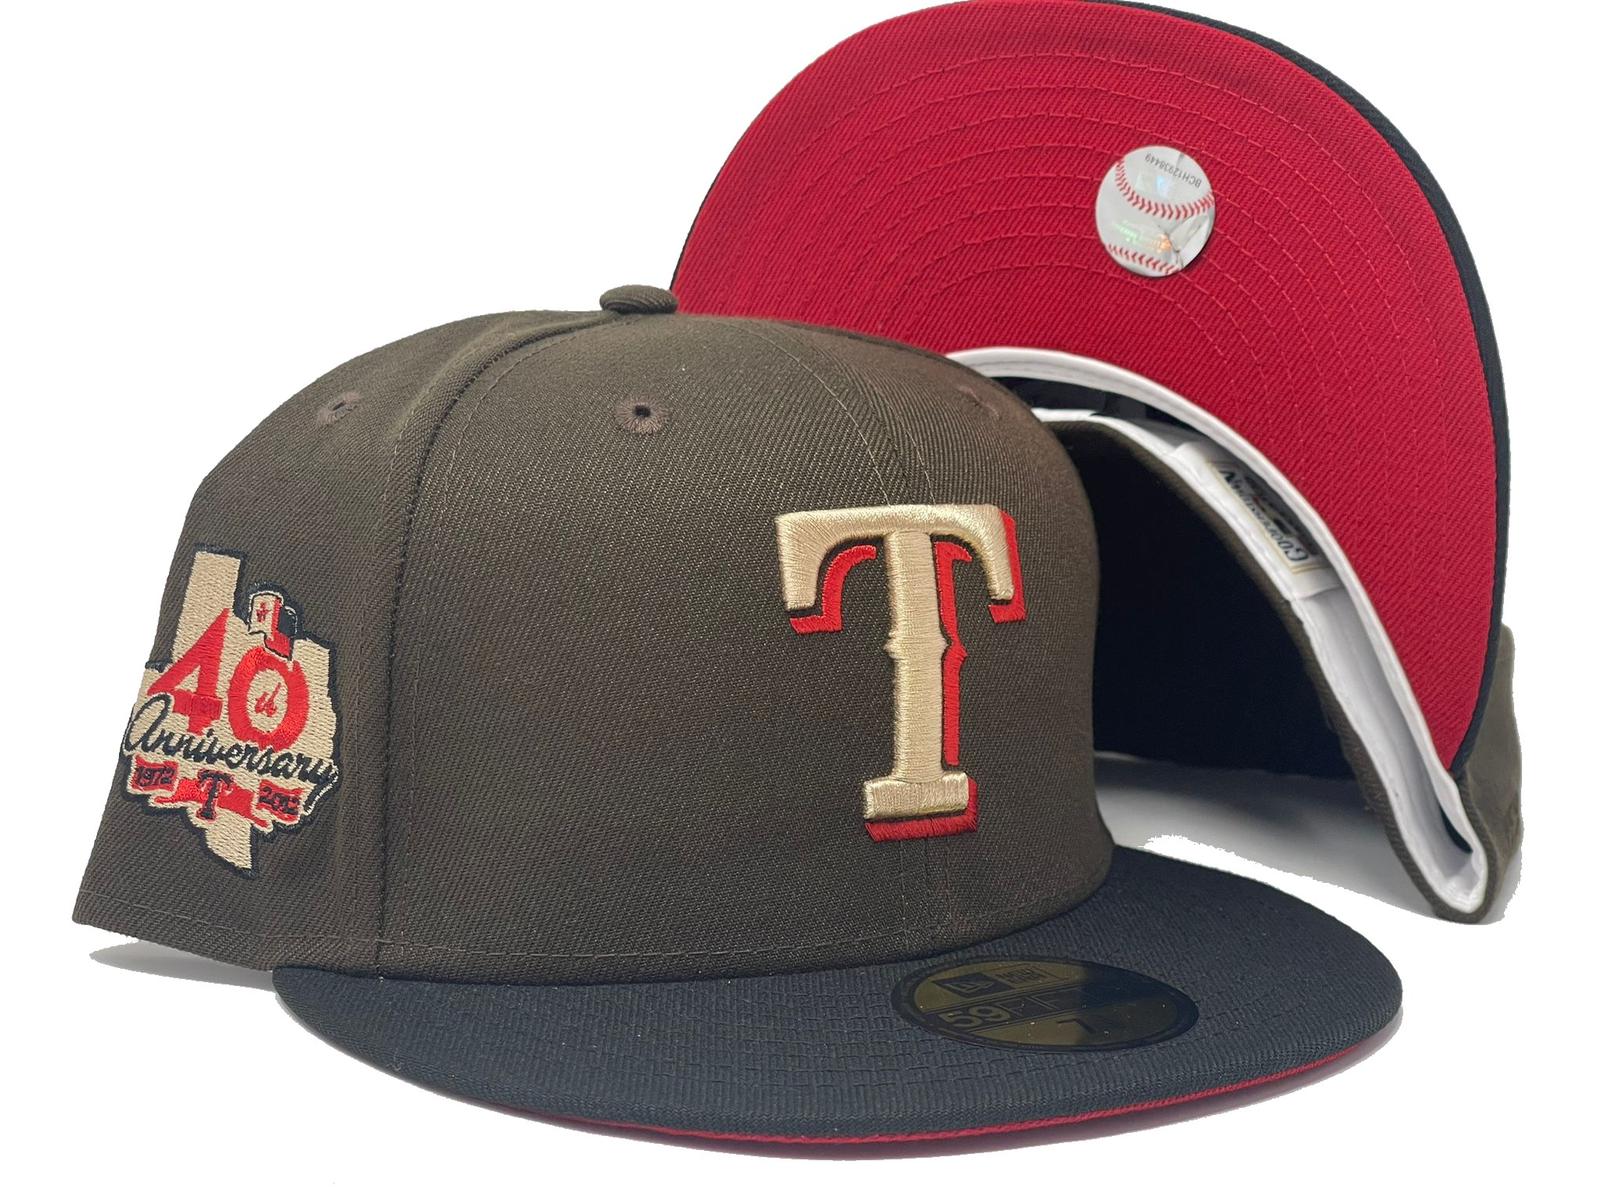 Texas Rangers (40th Anniversary Patch) – House Of Fitteds